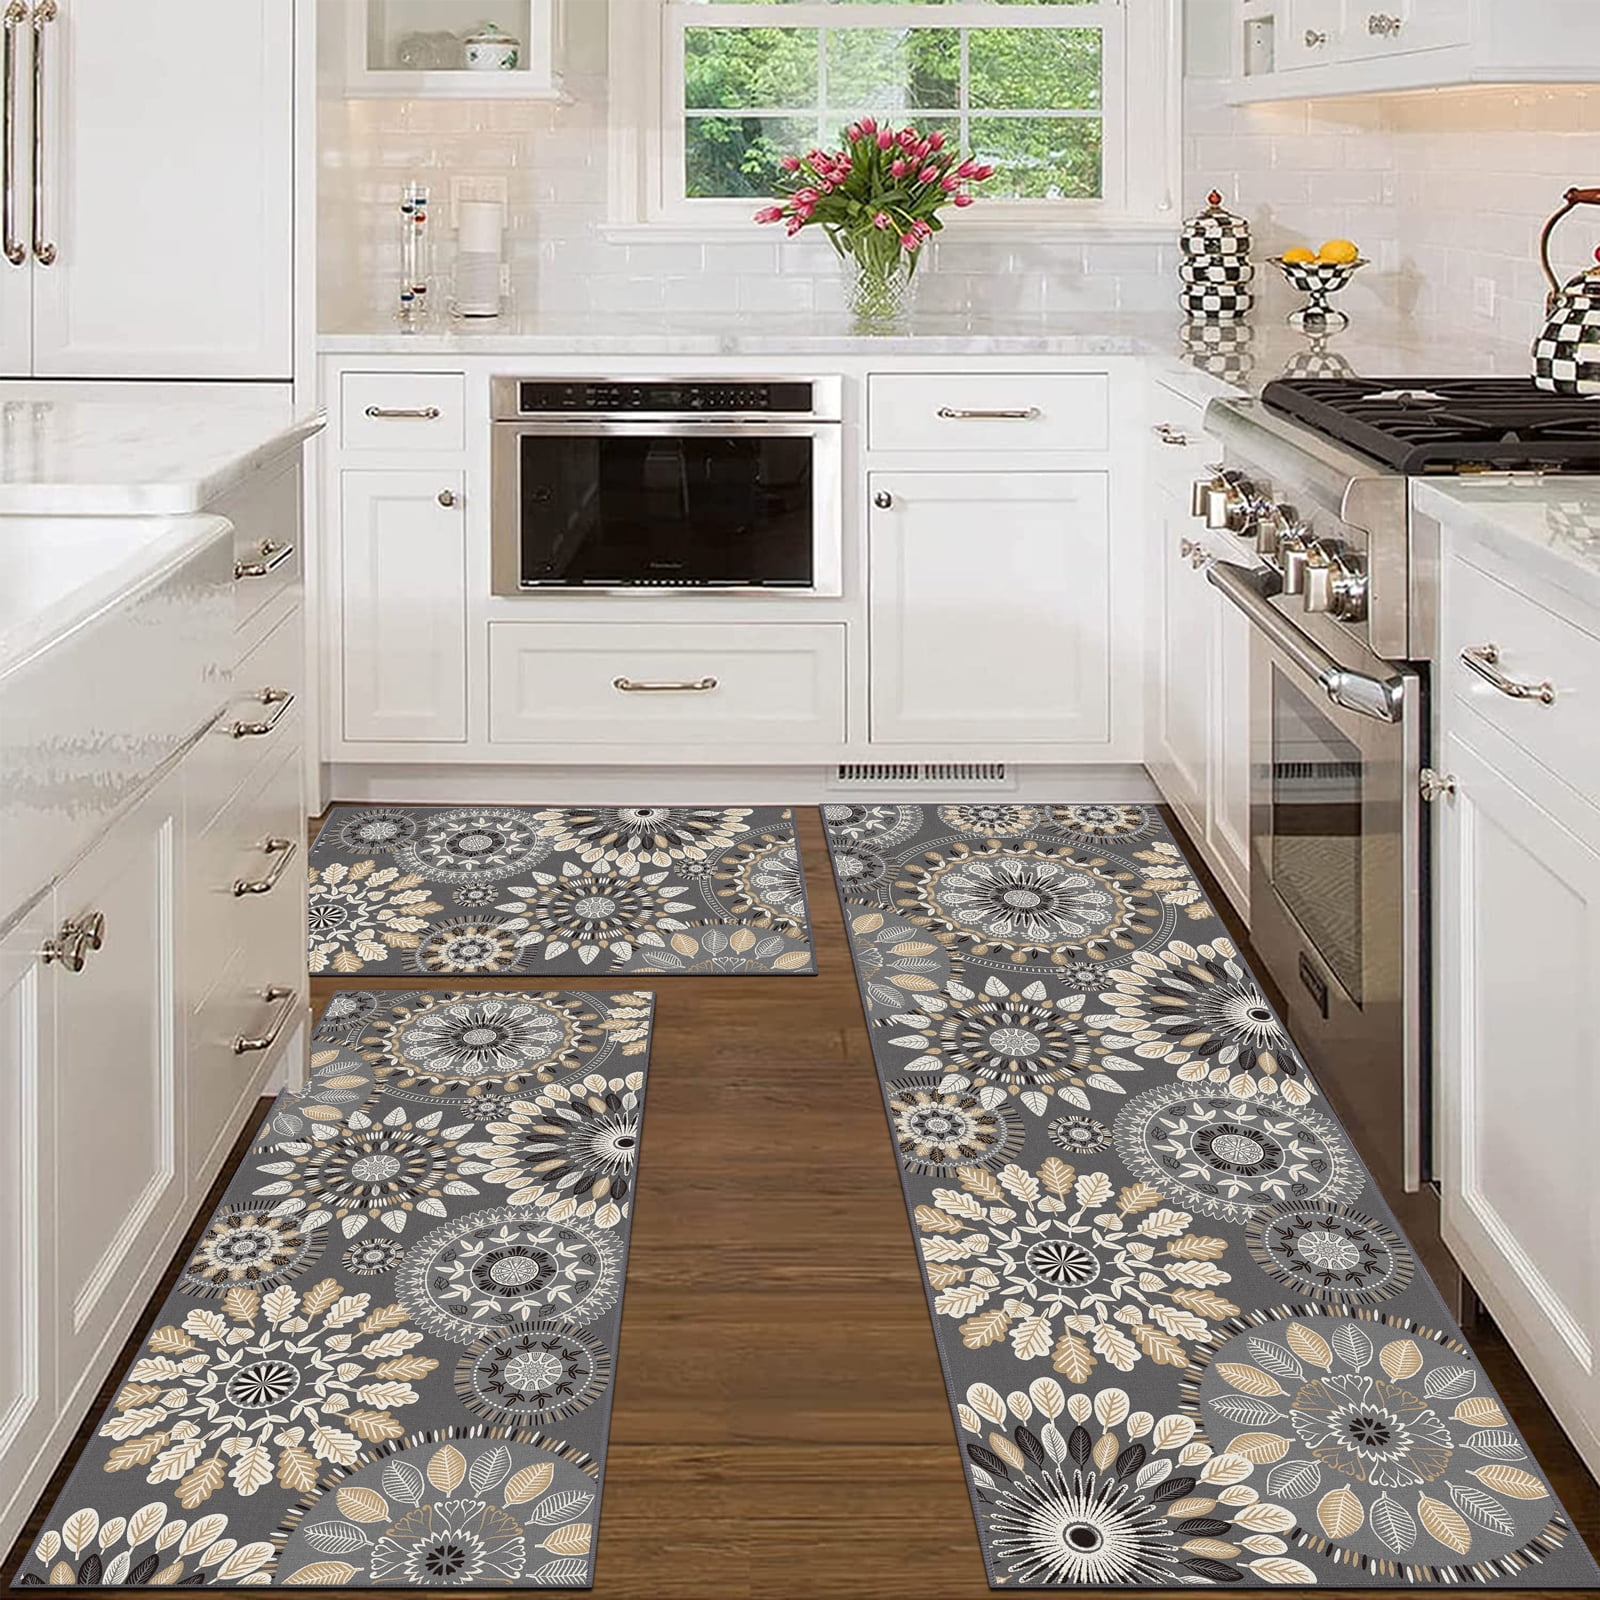 famibay Boho Kitchen Mats for Floor 2 Piece, Cushioned Kitchen